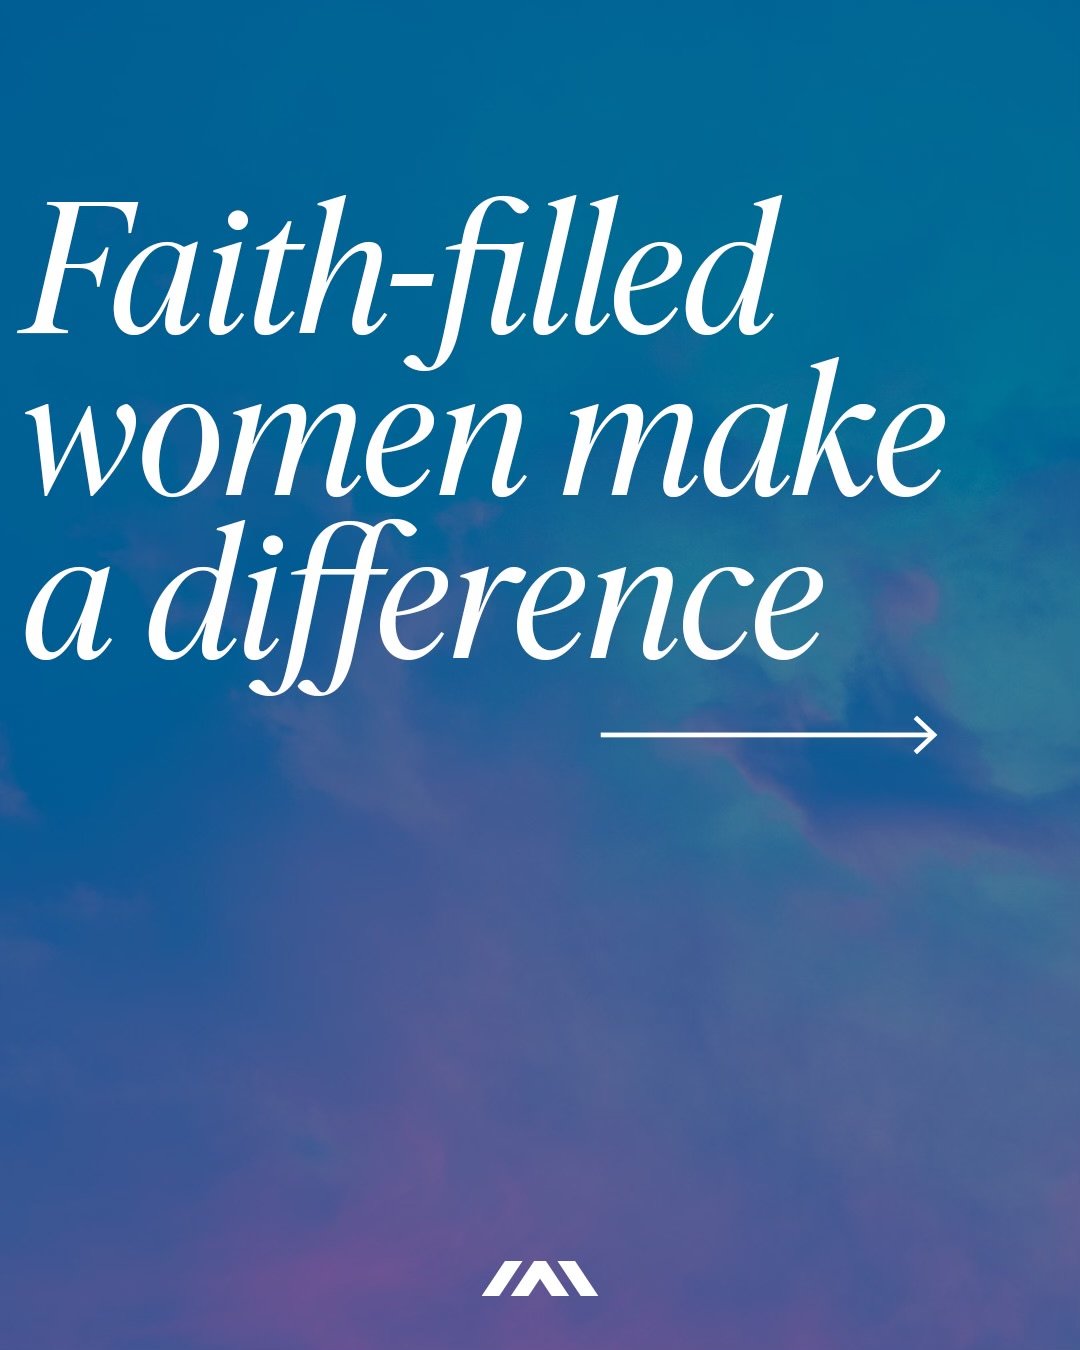 As we reflect on our pilar to Make Disciples, let's celebrate the faith-filled women in our lives and the impact they have in our church community. Tag a woman who has made a difference in your life!